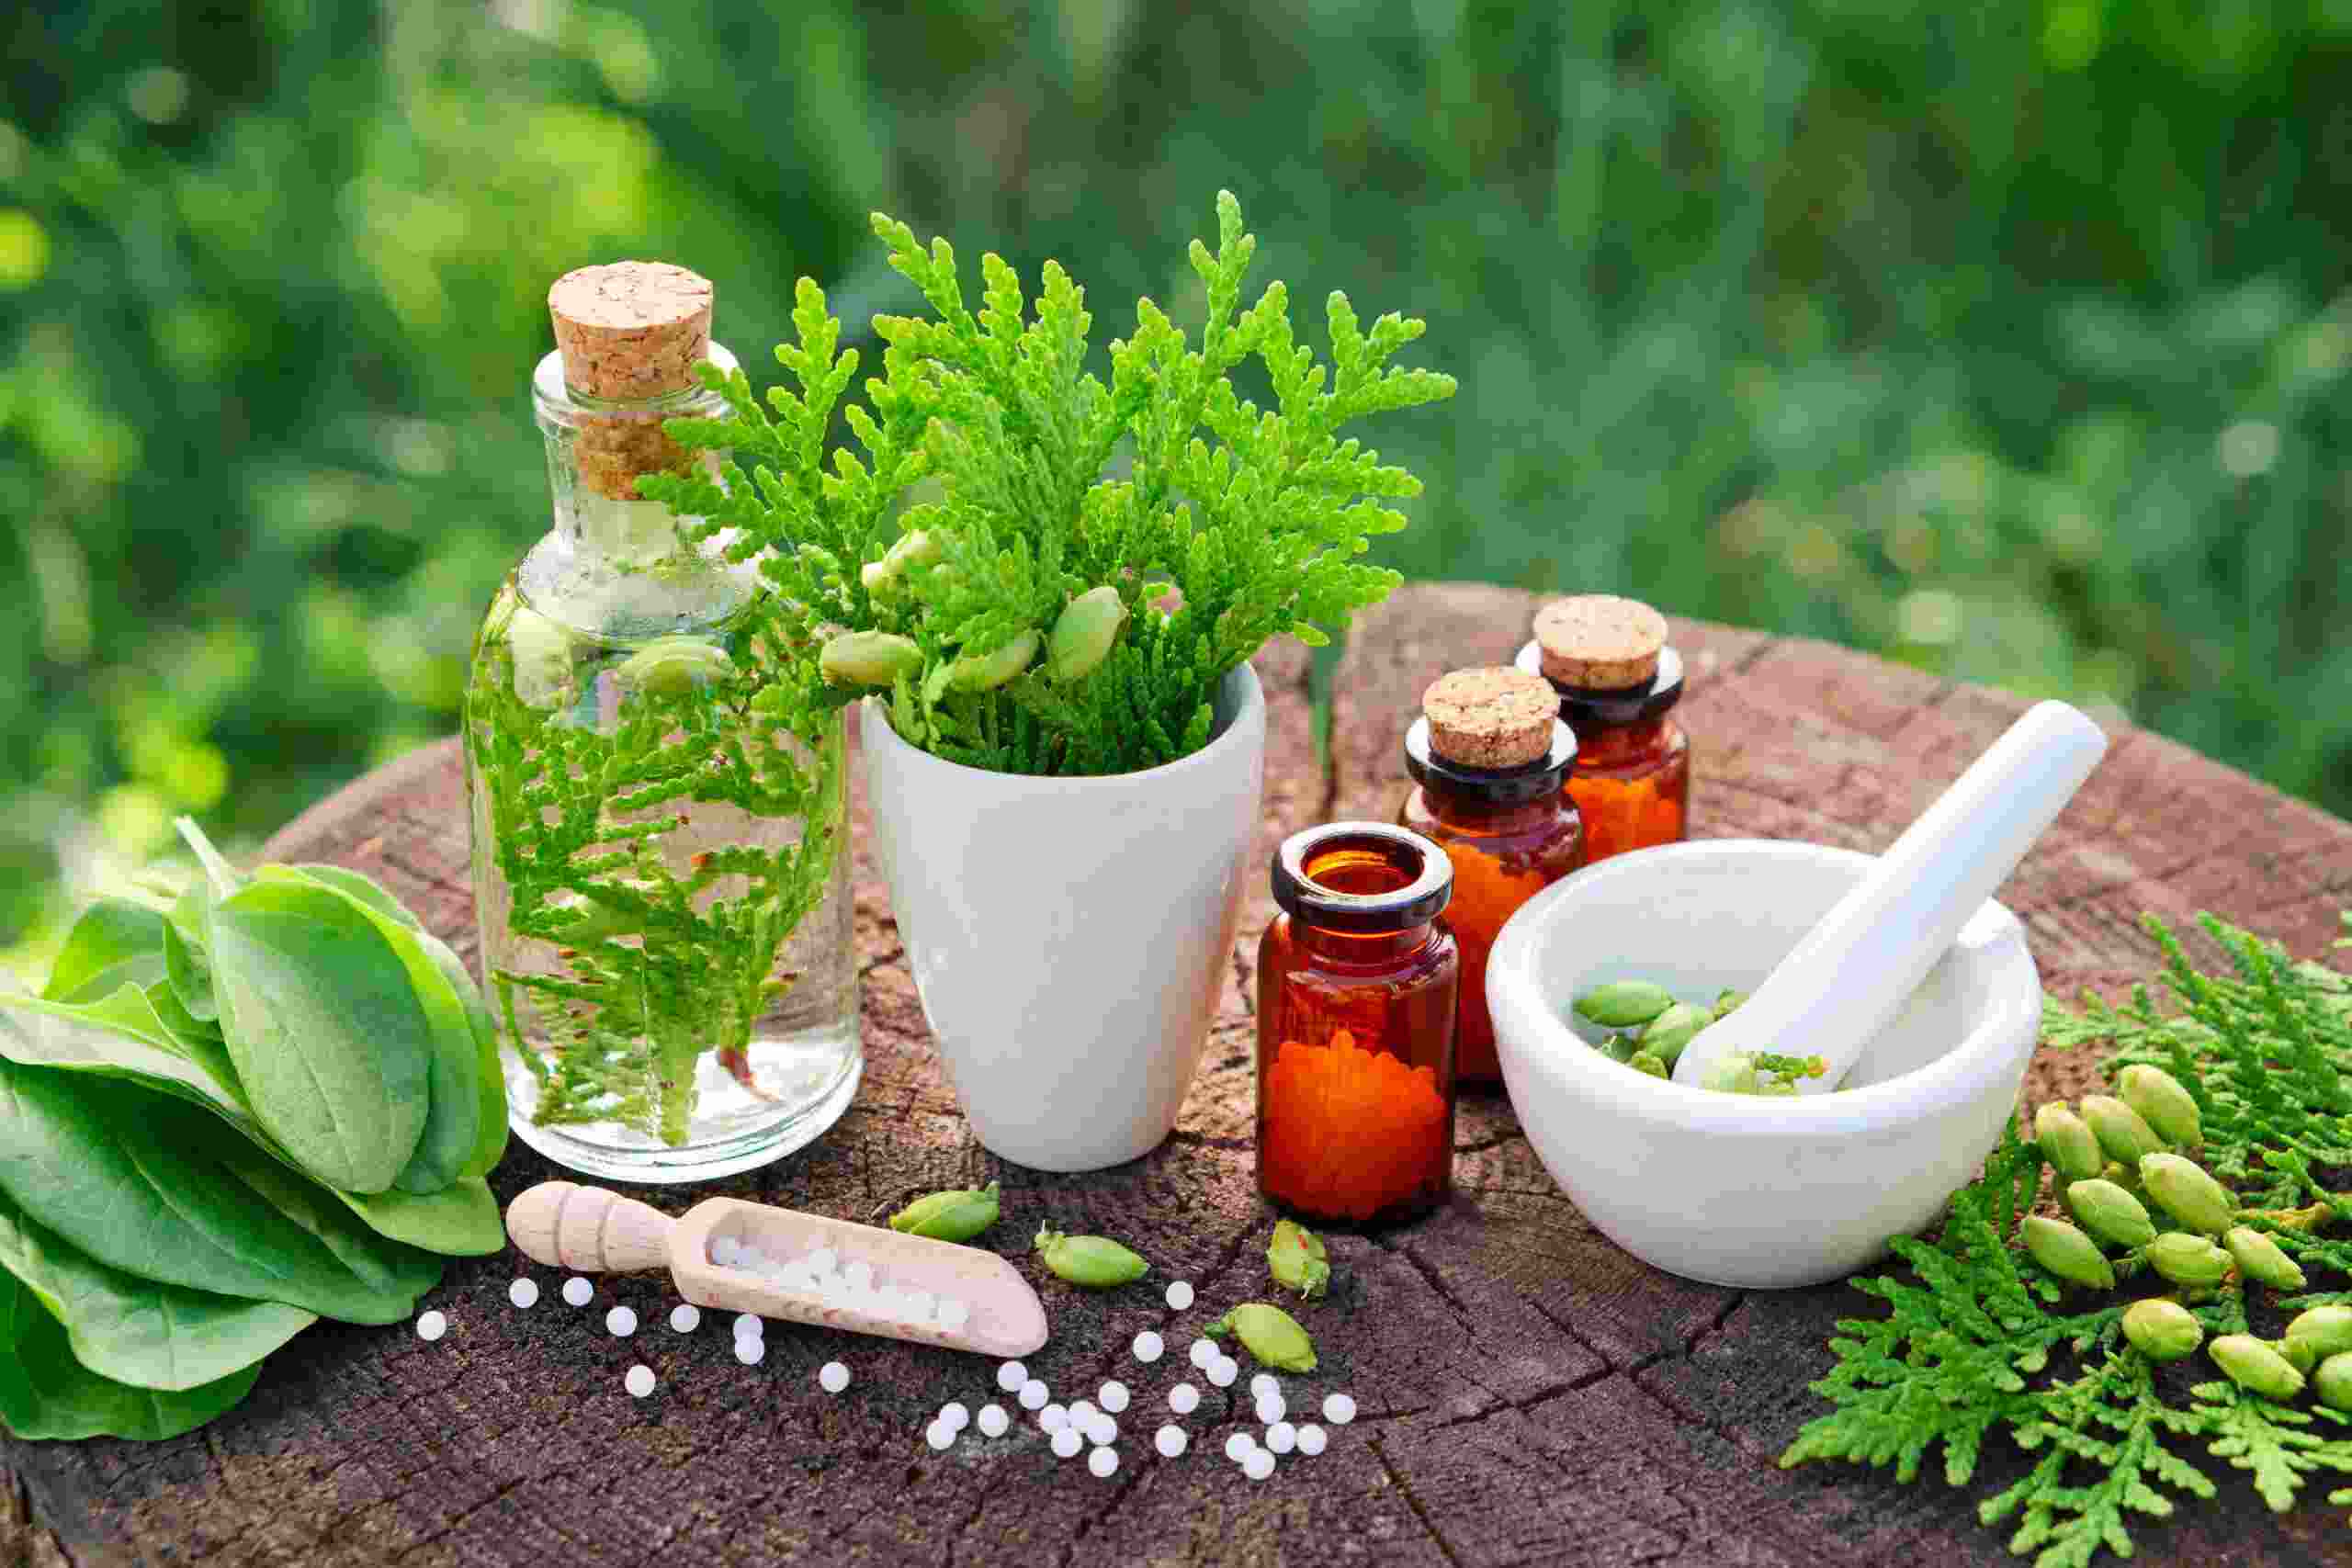 What Flowers Are Utilized For Making Herbal Medicine